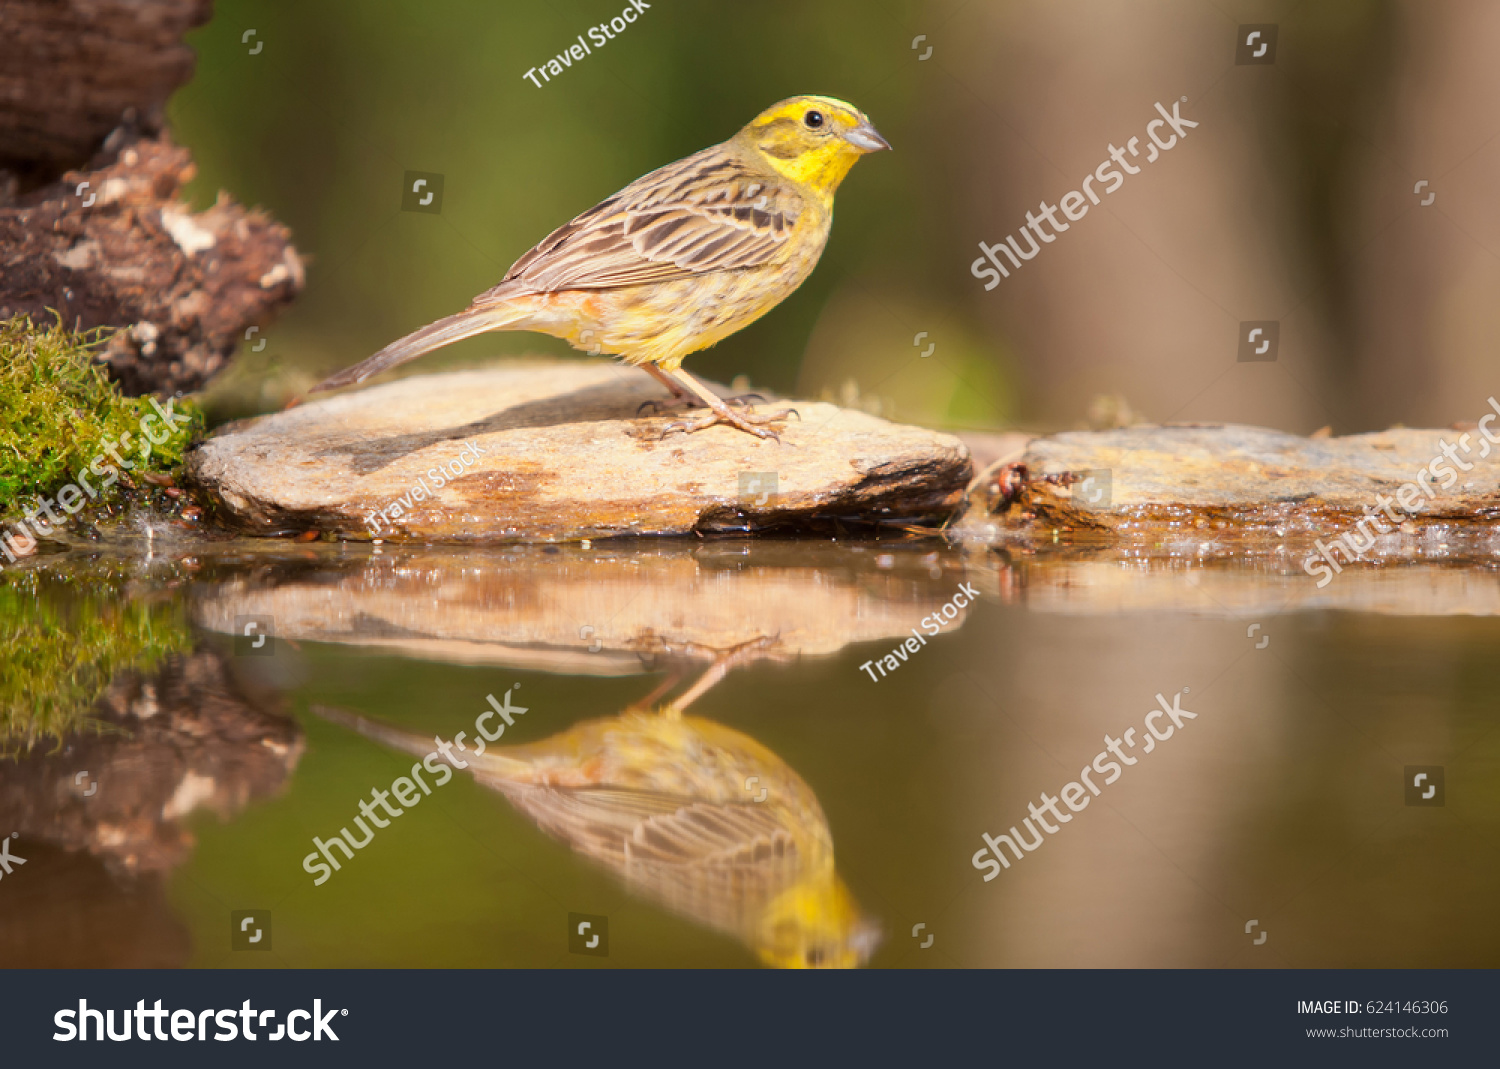 Greenfinch reflected in water #624146306